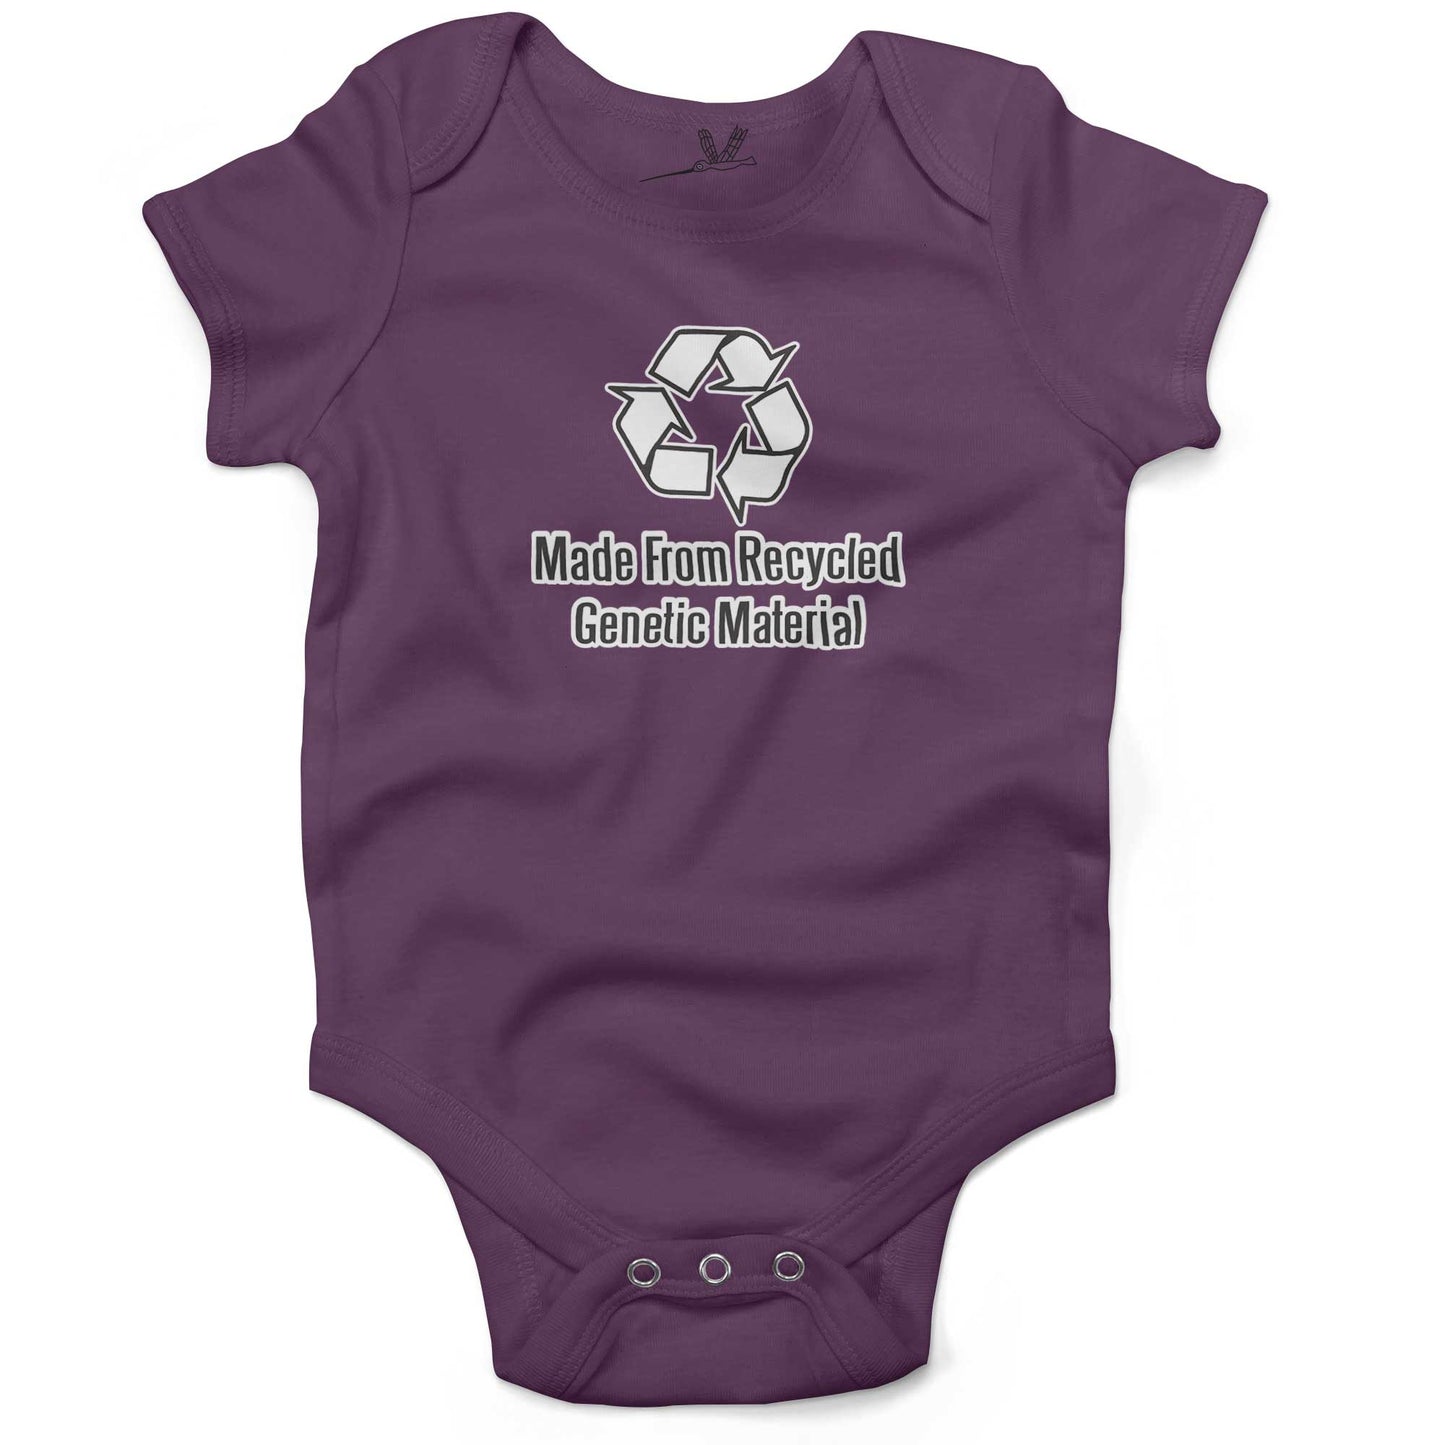 Made From Recycled Materials Infant Bodysuit or Raglan Baby Tee-Organic Purple-3-6 months